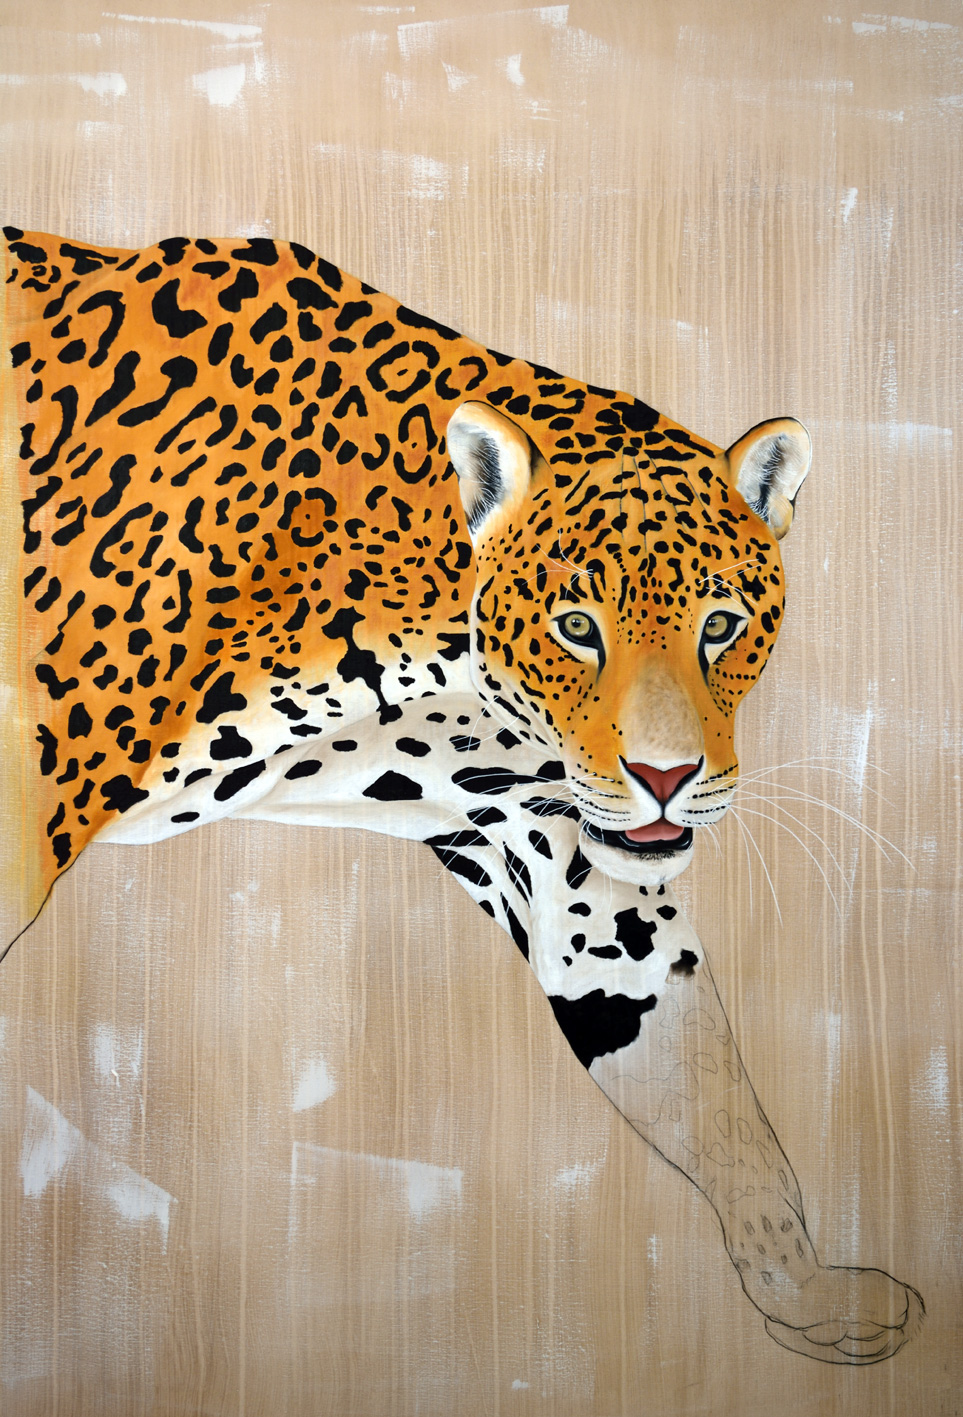 PANTHERA-ONCA jaguar-panthera-onca-delete-threatened-endangered-extinction Thierry Bisch Contemporary painter animals painting art decoration nature biodiversity conservation